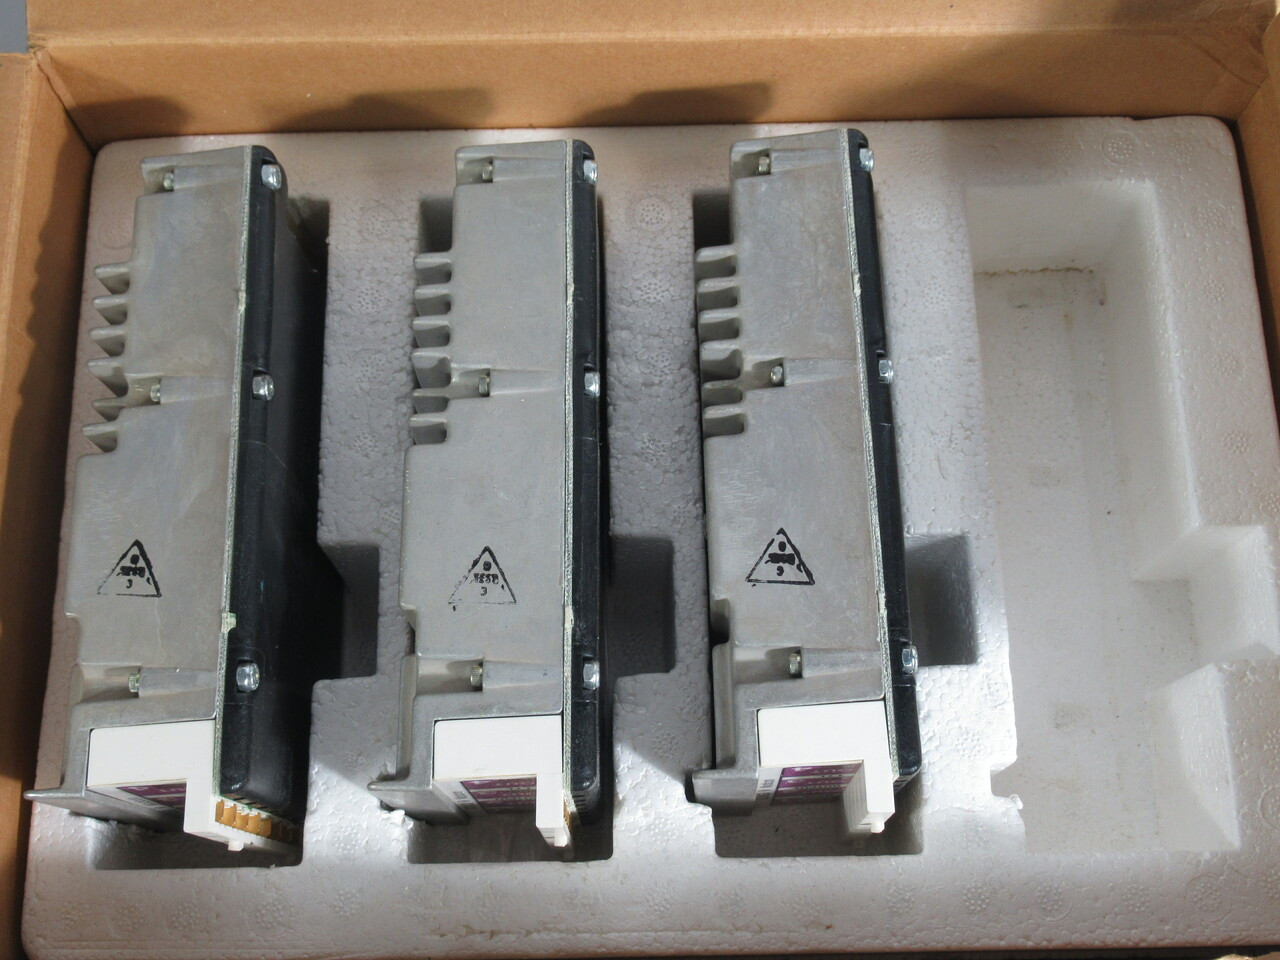 Gould/Modicon AS-B556-101 Output Module 5V TTL Lot of 3 ! NEW !